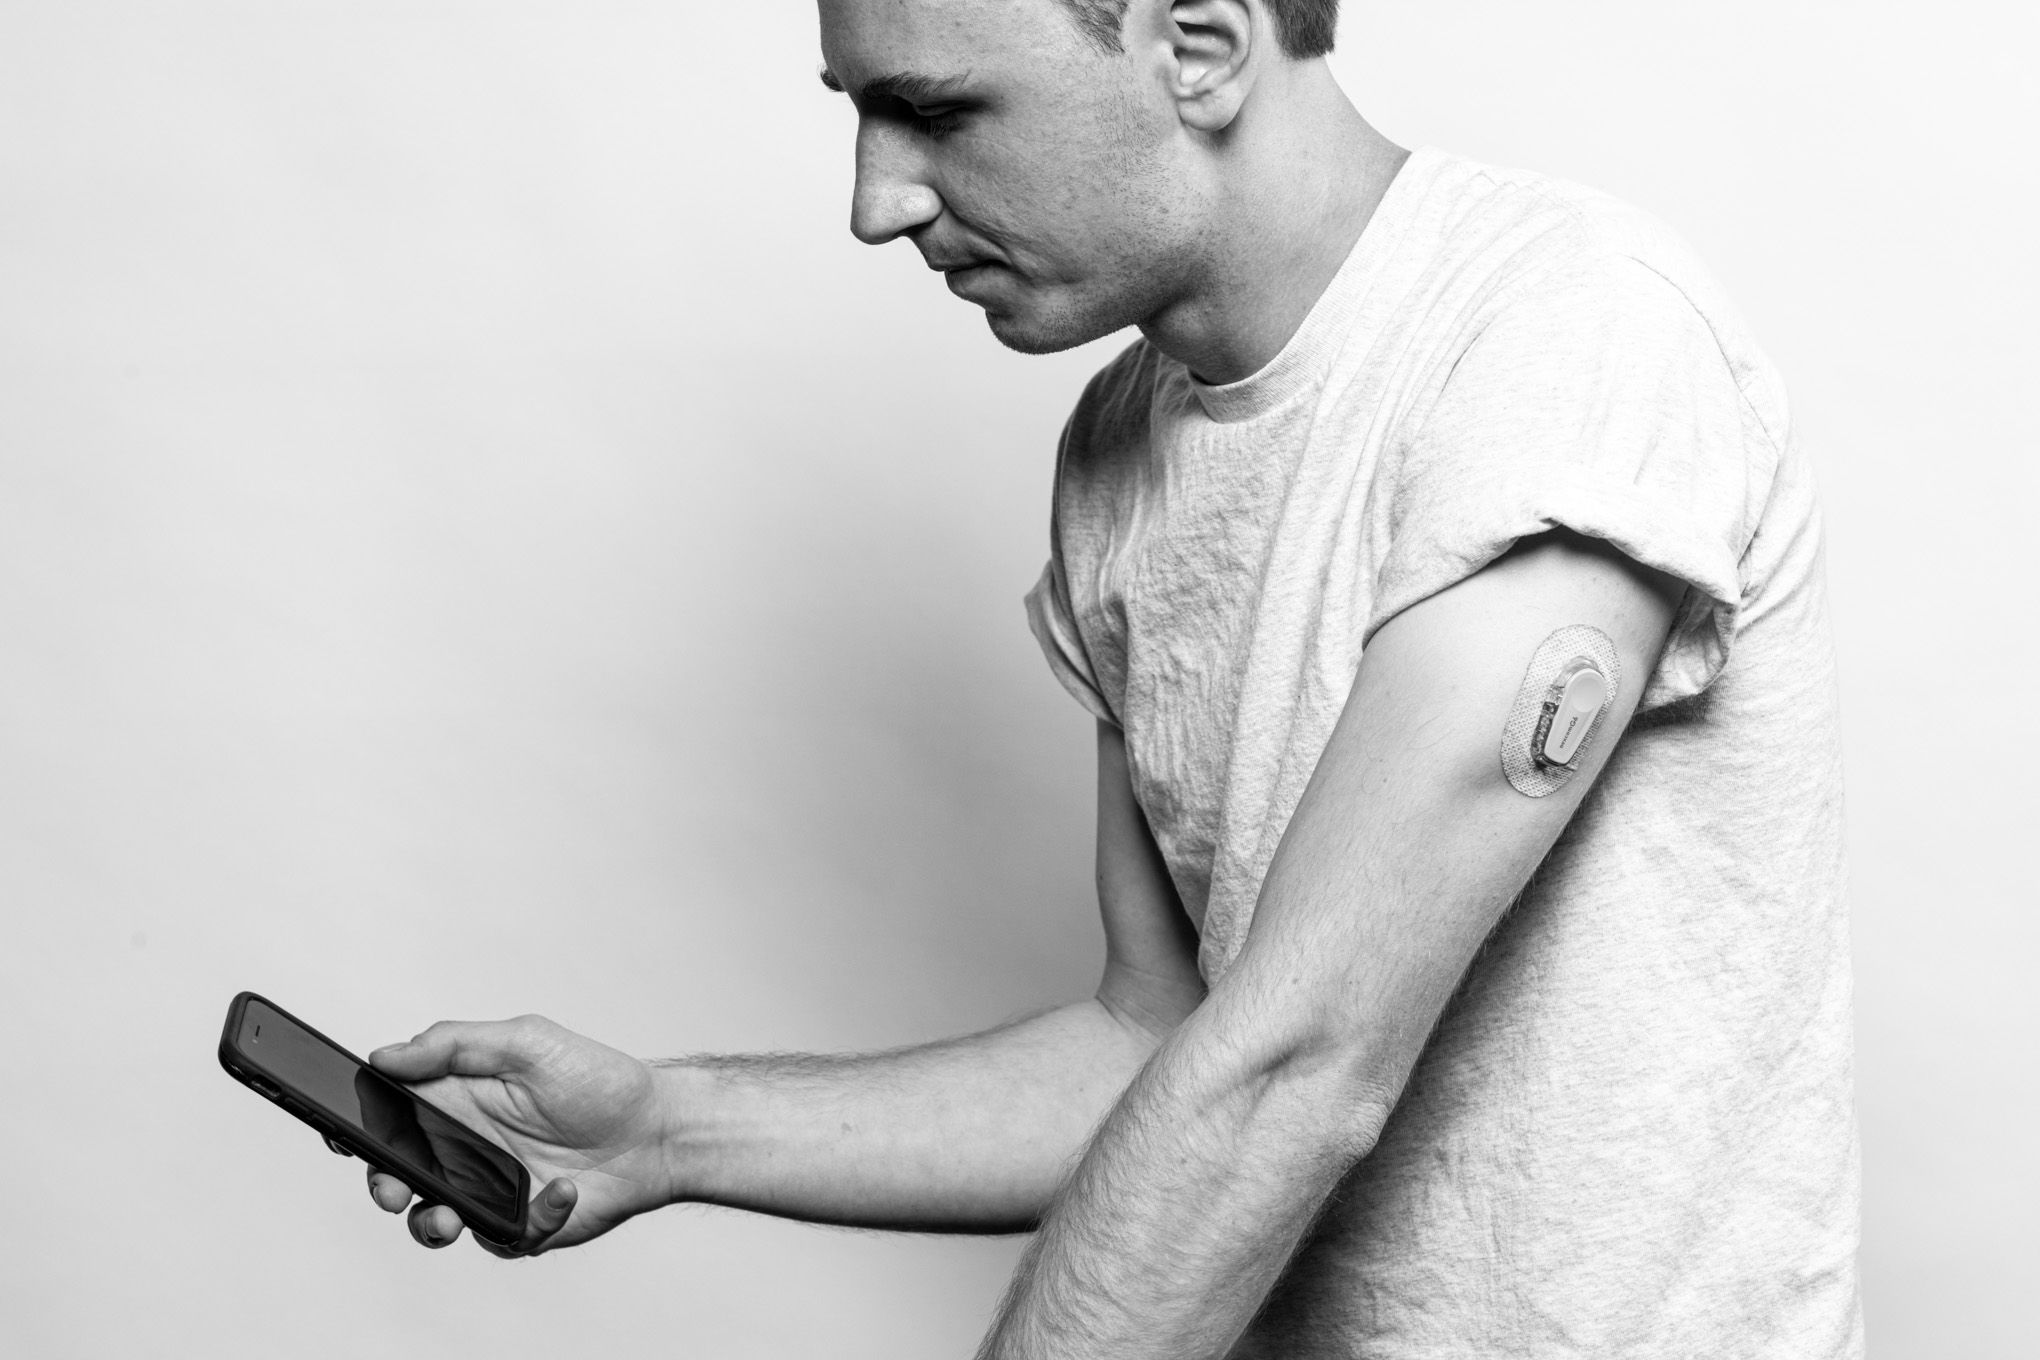 A black-and-white photograph of John looking at his phone. He is wearing a glucose monitor on his upper left arm.